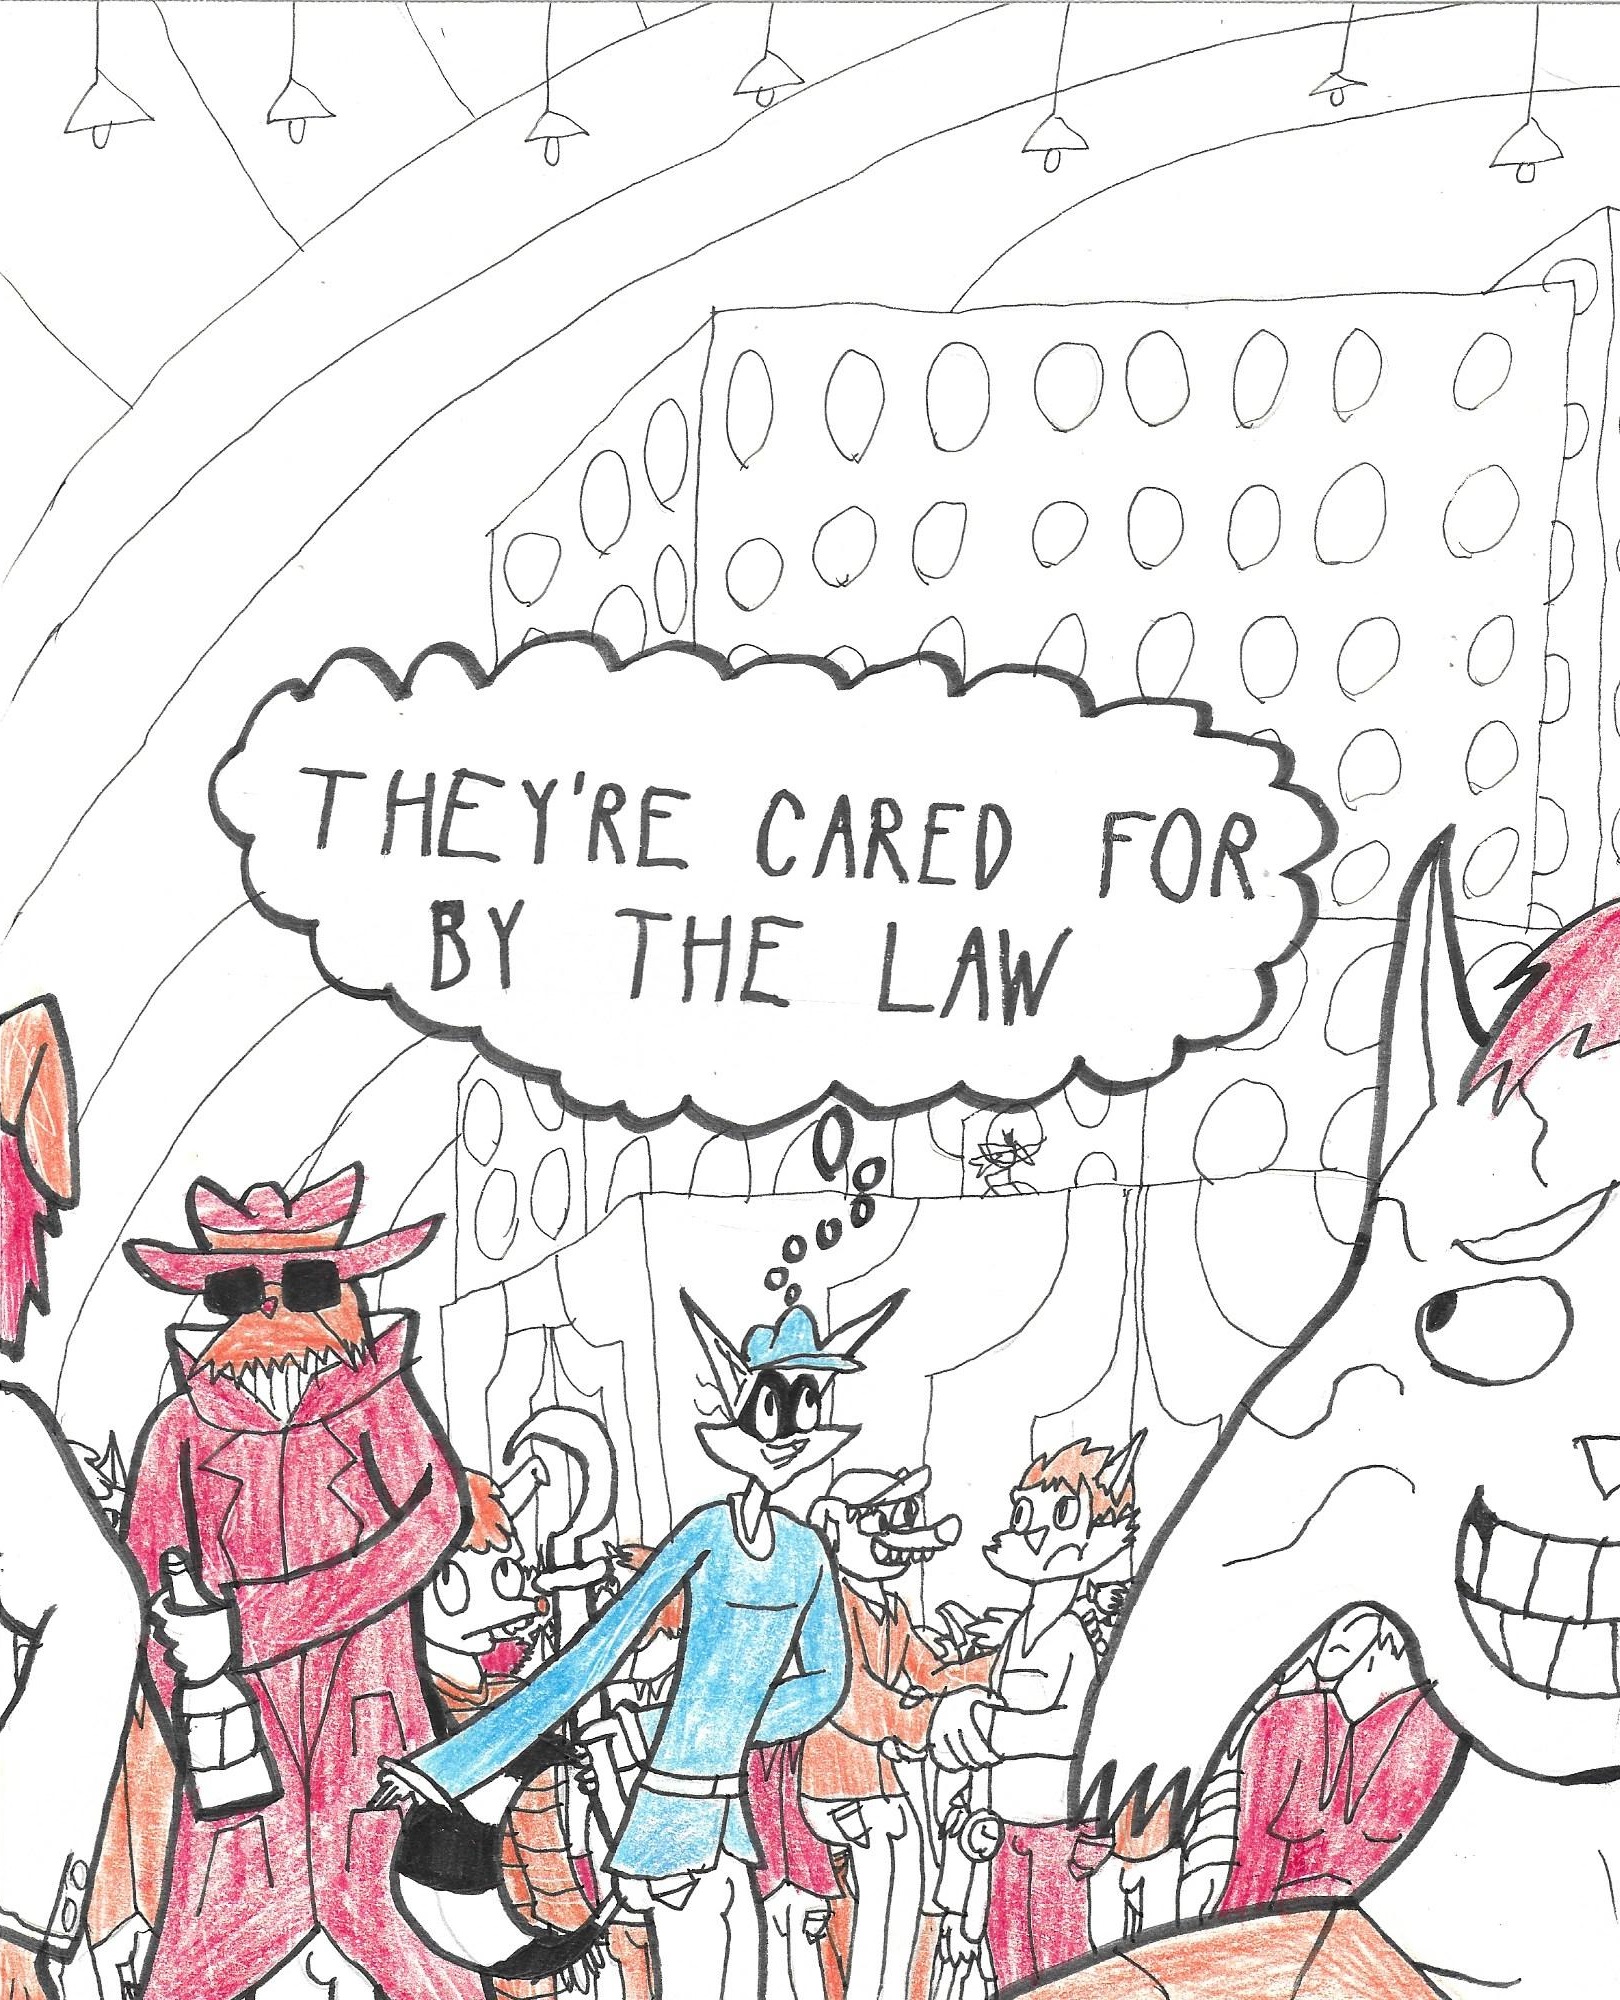 Sly thinks: They're cared for by the law.